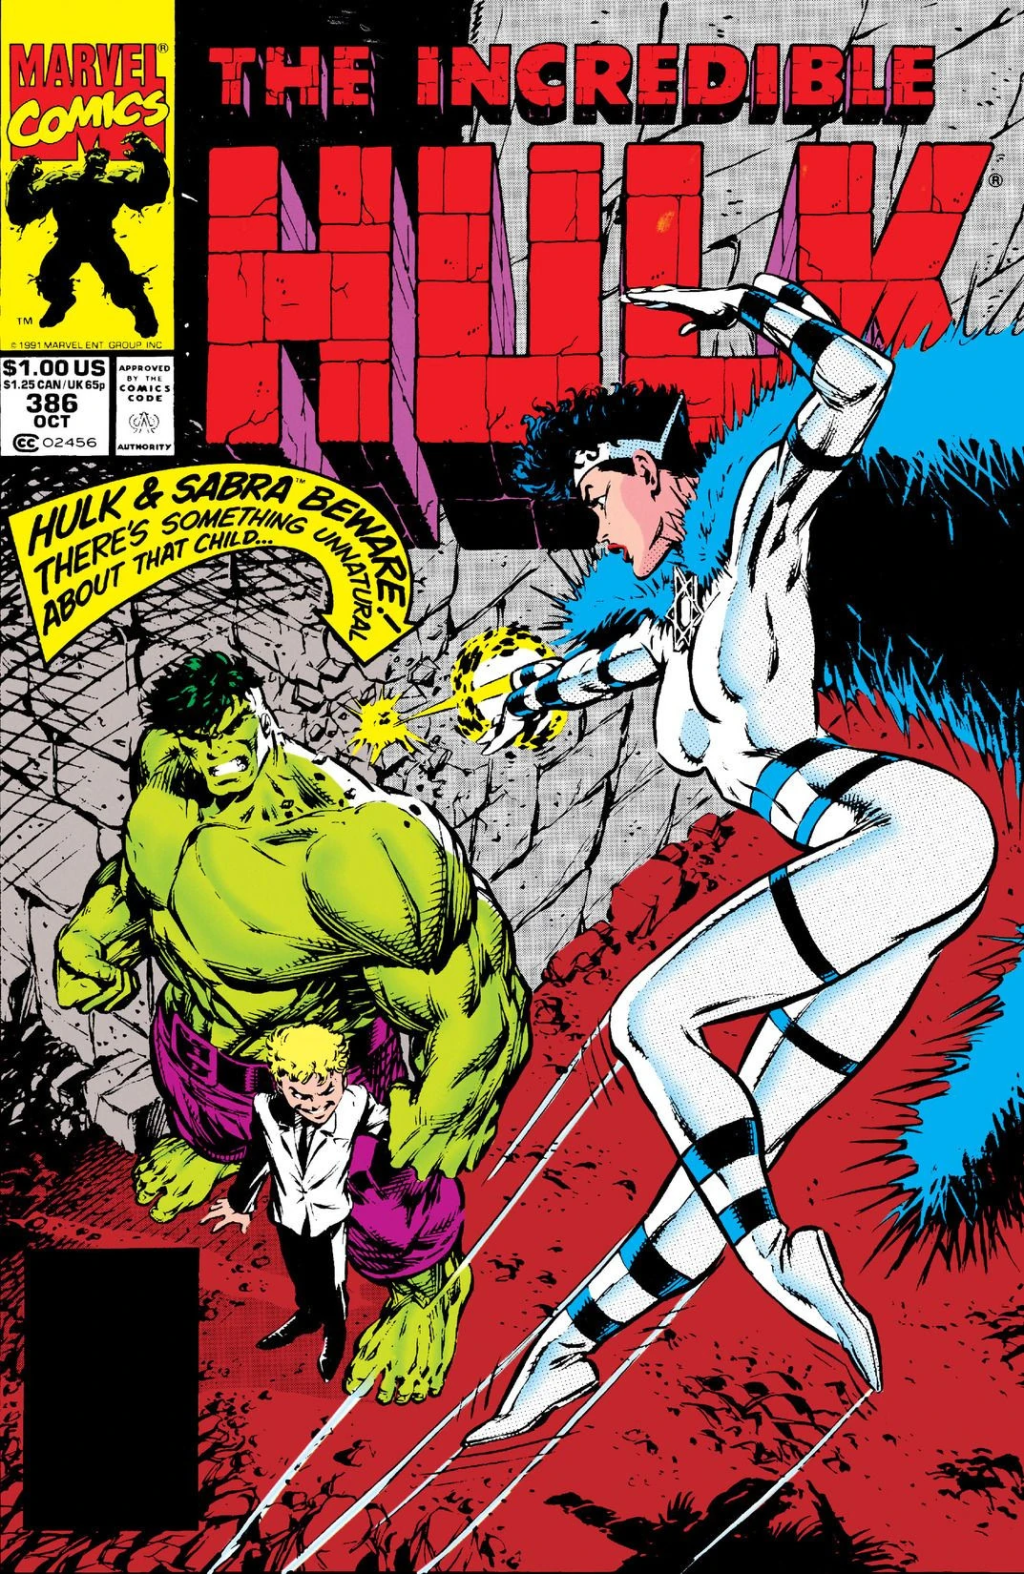 Sabra makes her debut on Dale Keown's cover to The Incredible Hulk Vol. 1 Issue #386 "Little Hitler" (1991), Marvel Comics